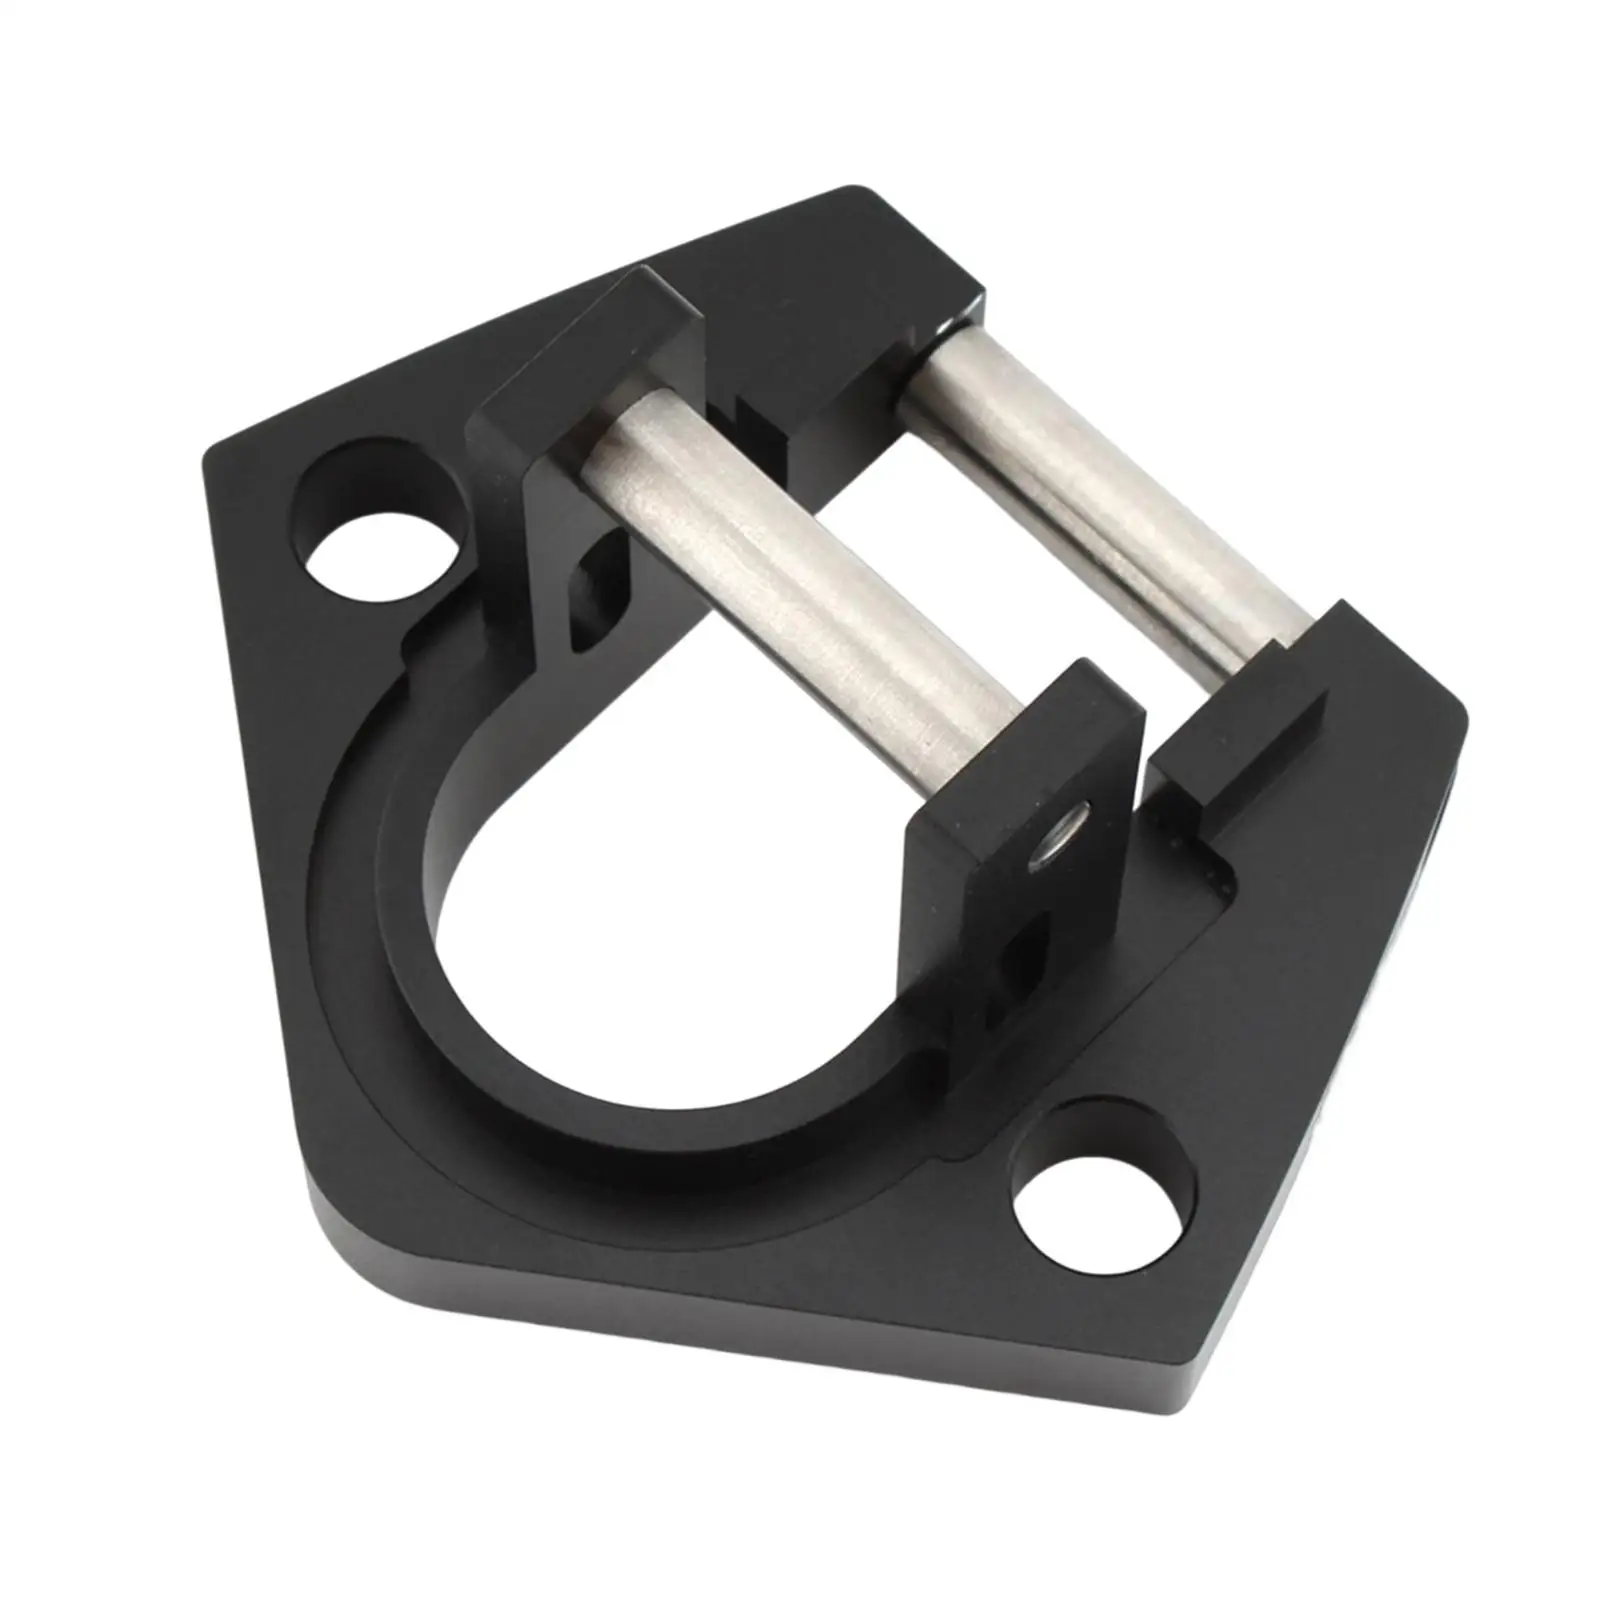 Bottom Mounting Bracket Foot Lightweight and Strong Aluminum Alloy Hardware Spare Parts